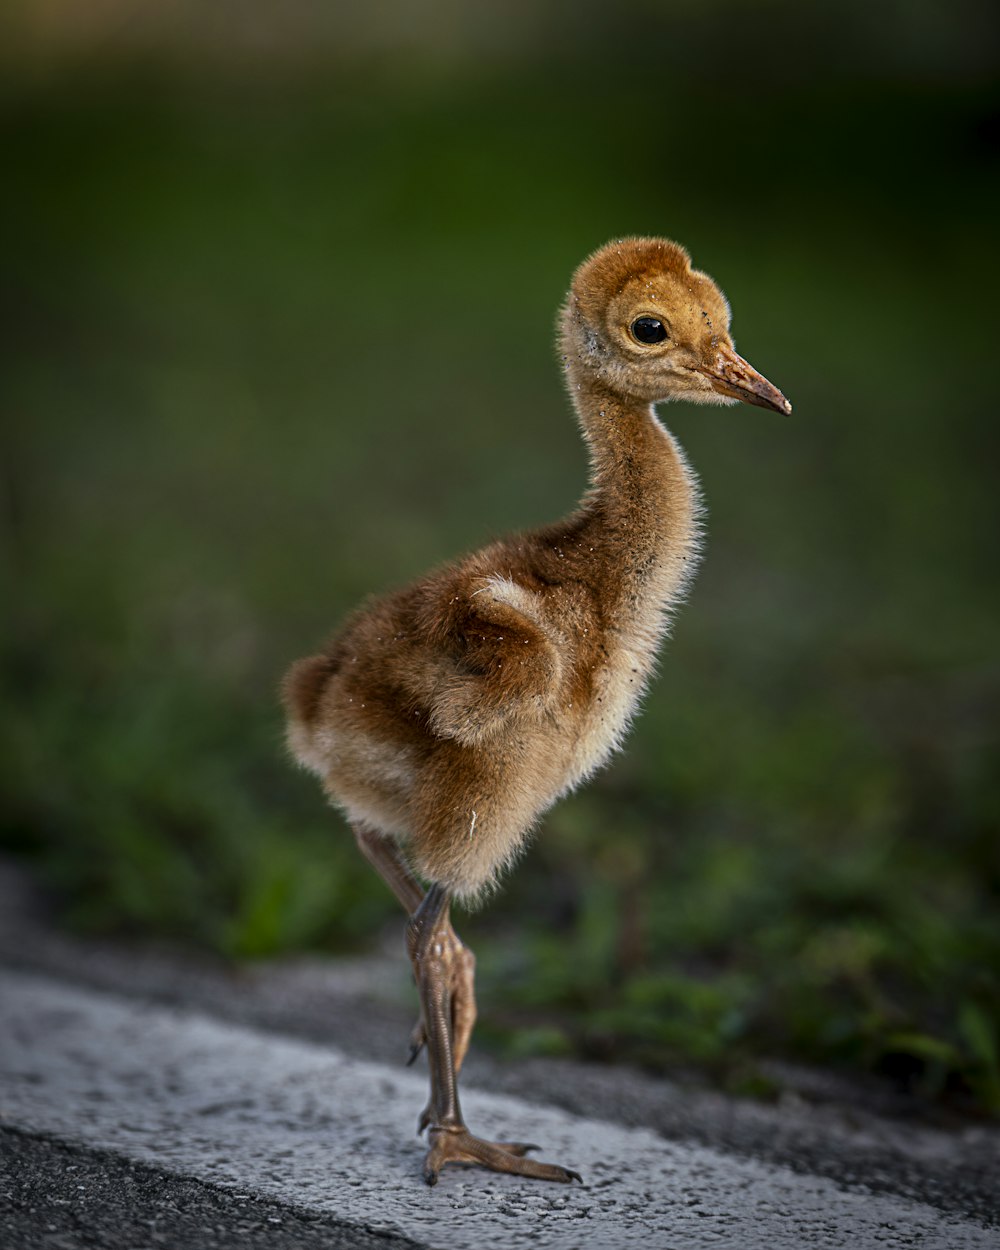 a small bird standing on the side of a road